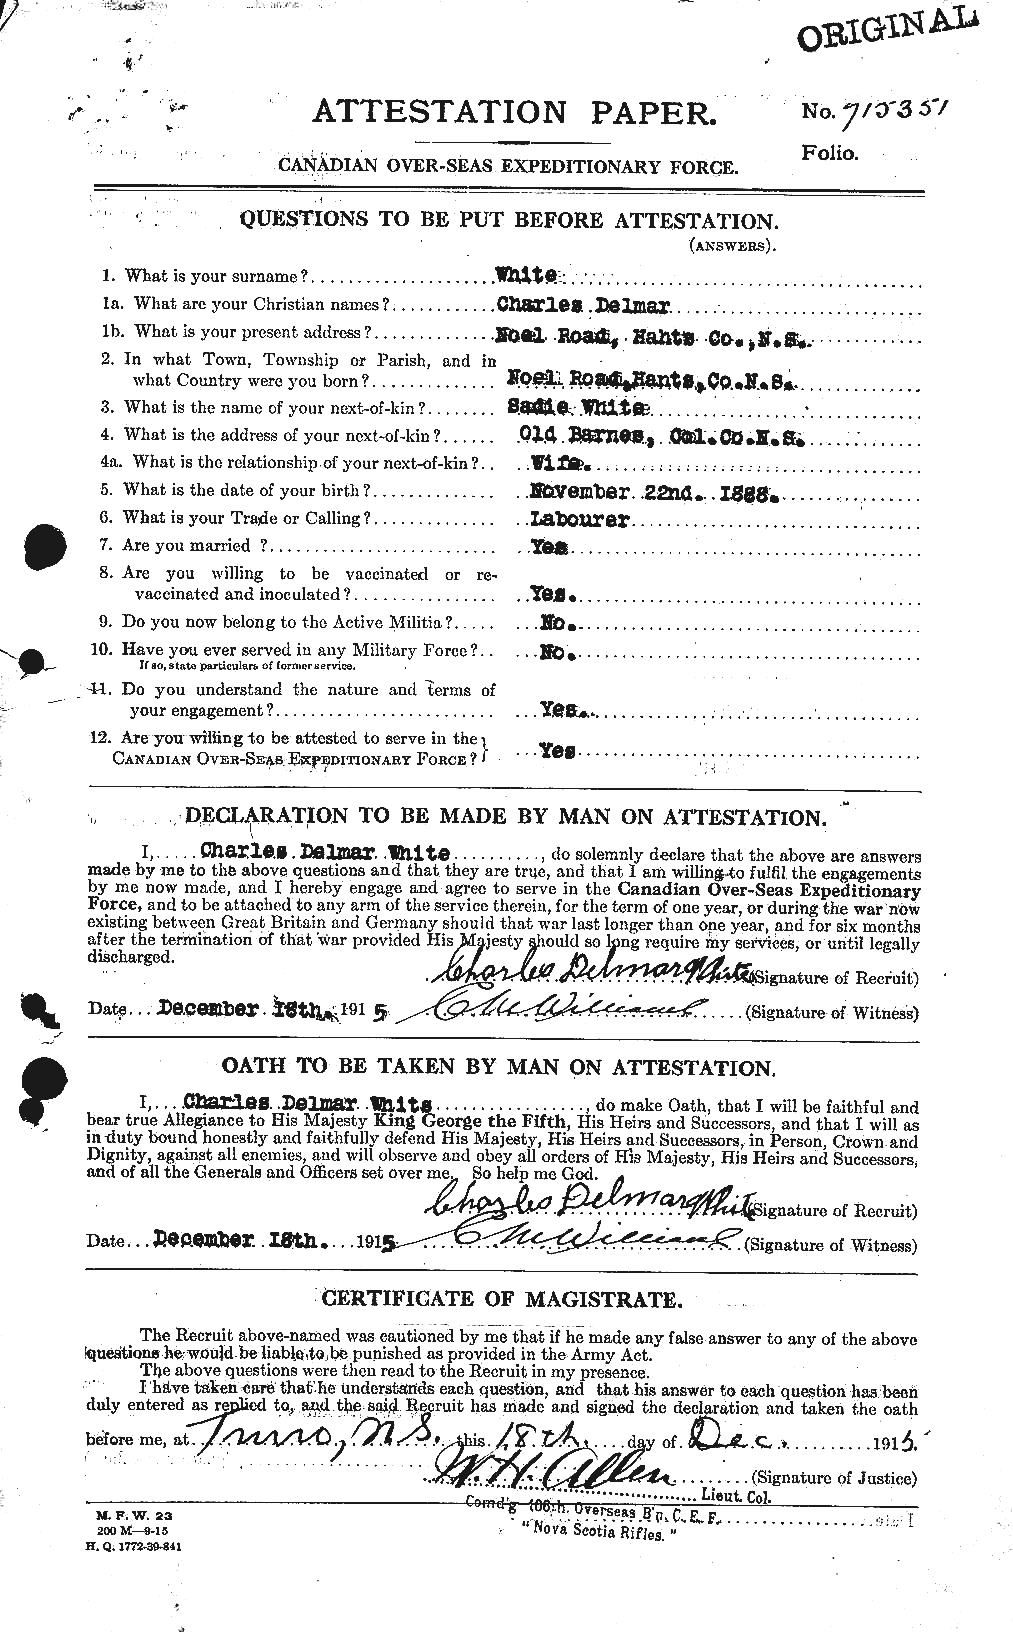 Personnel Records of the First World War - CEF 669924a